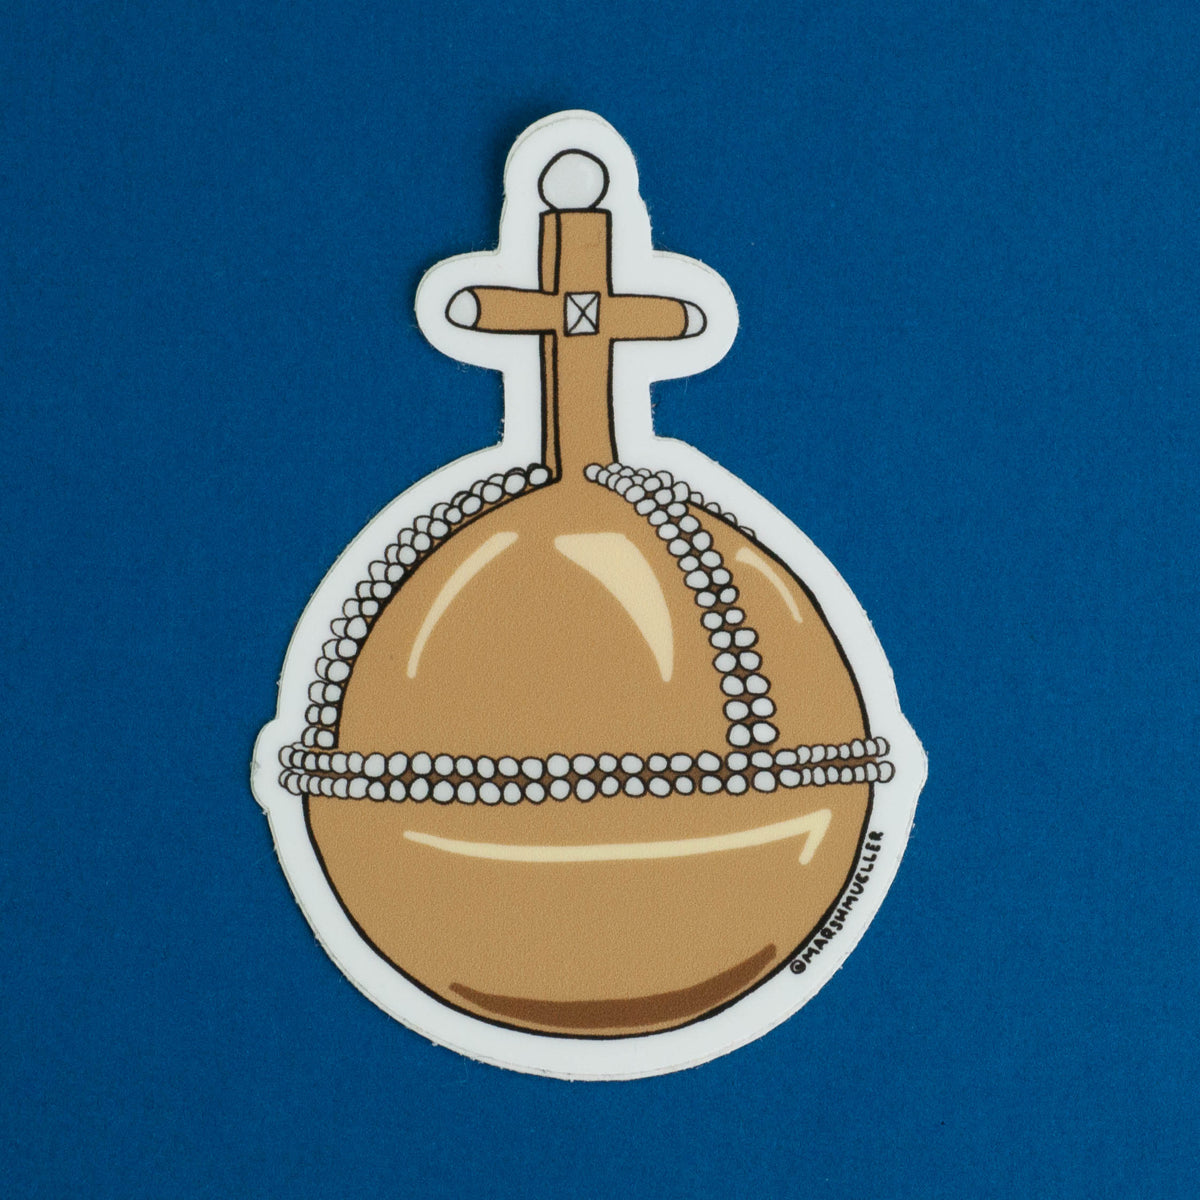 monty python and the holy grail holy hand grenade